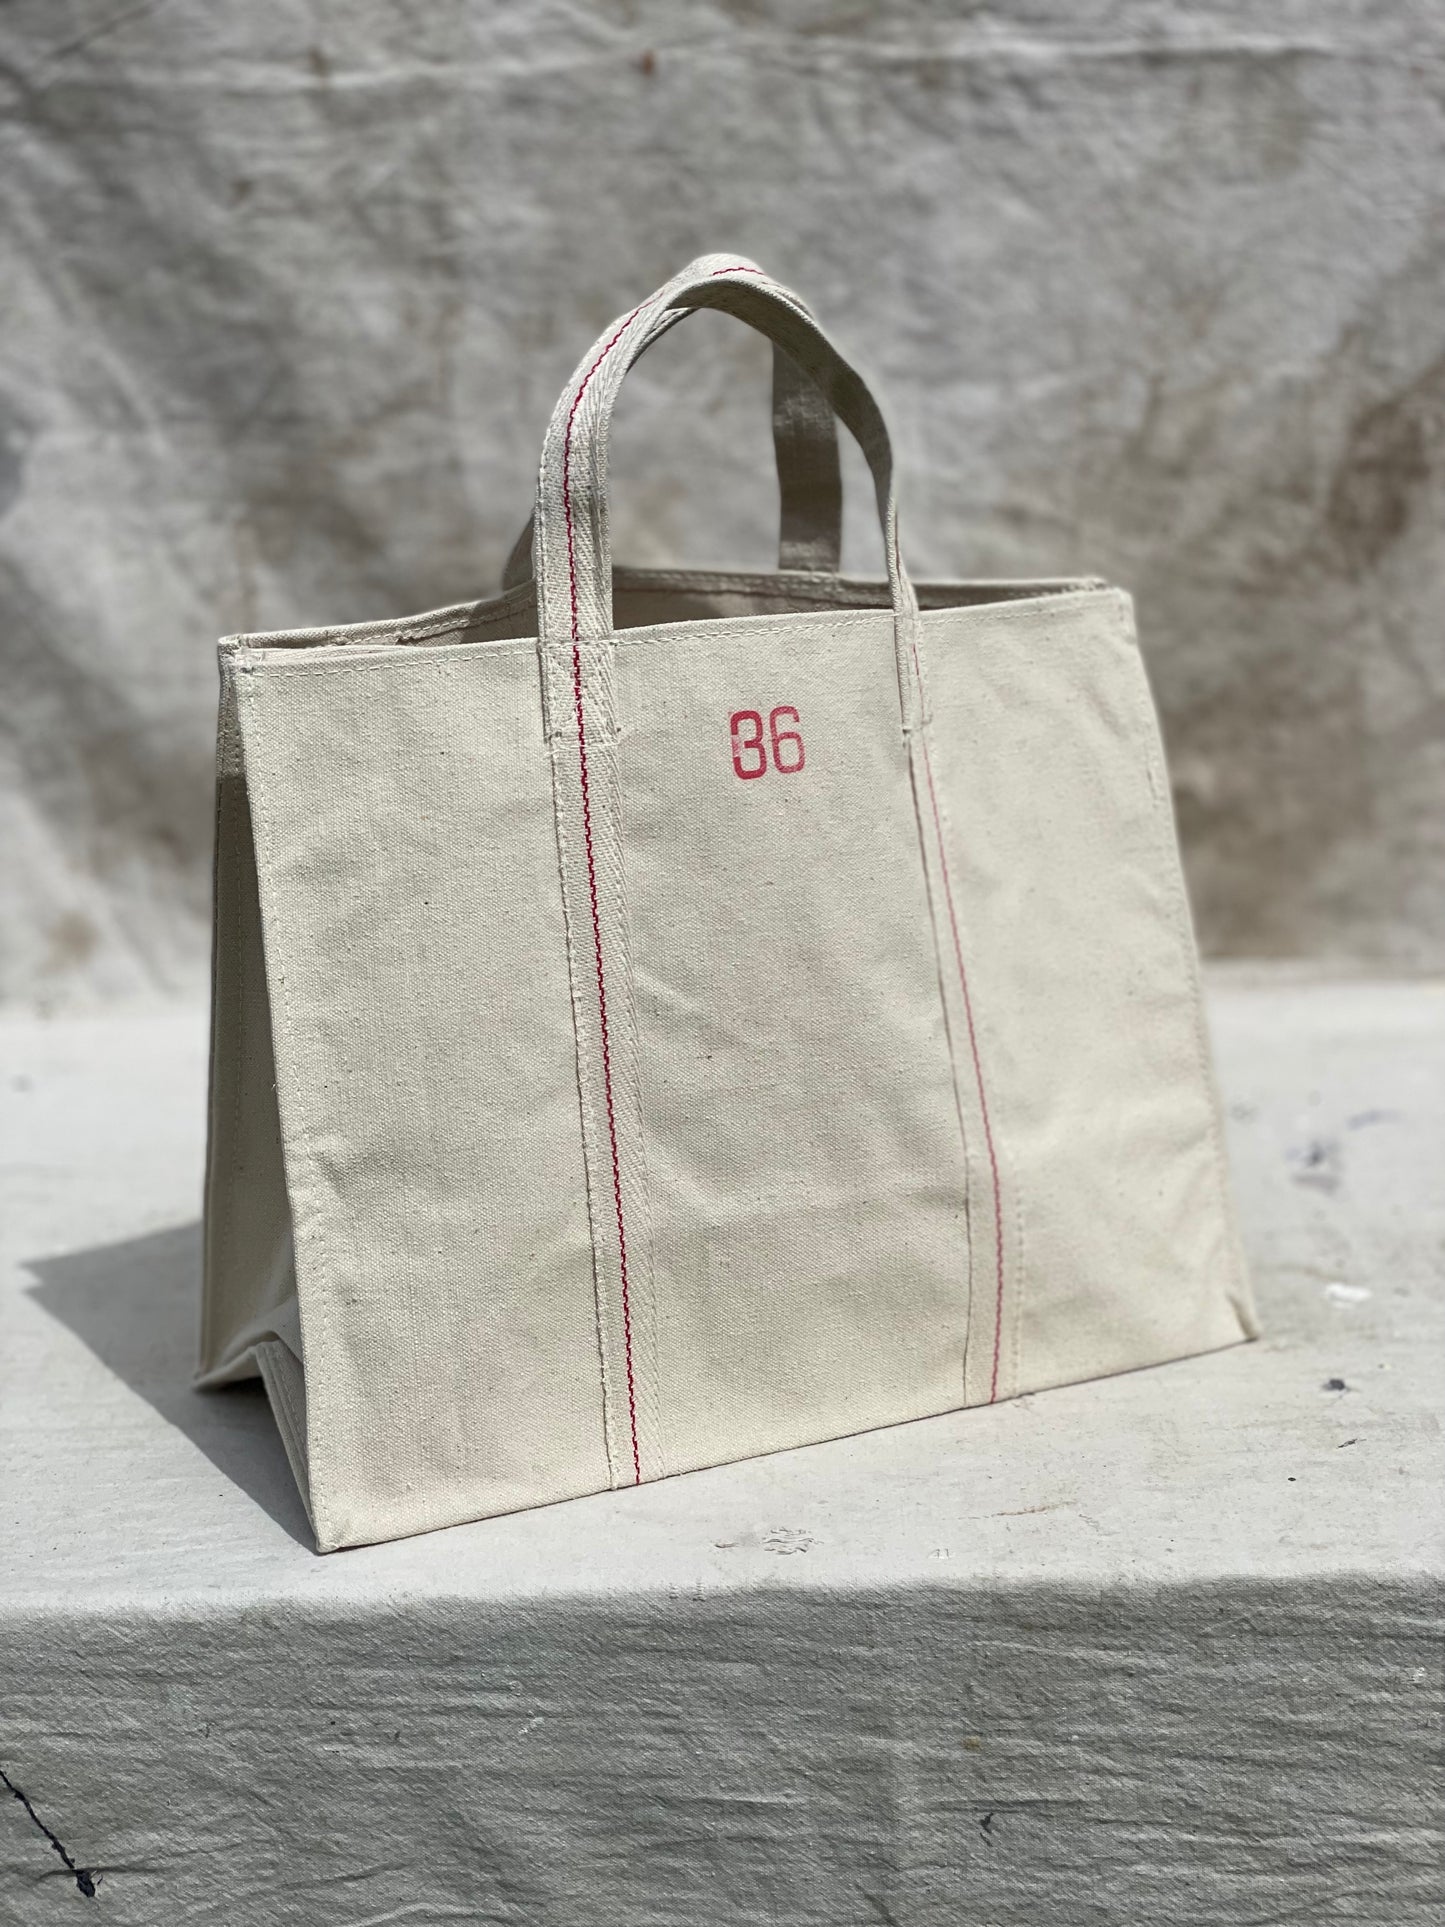 Heavy Duty Natural Canvas Tote Bag Size 36